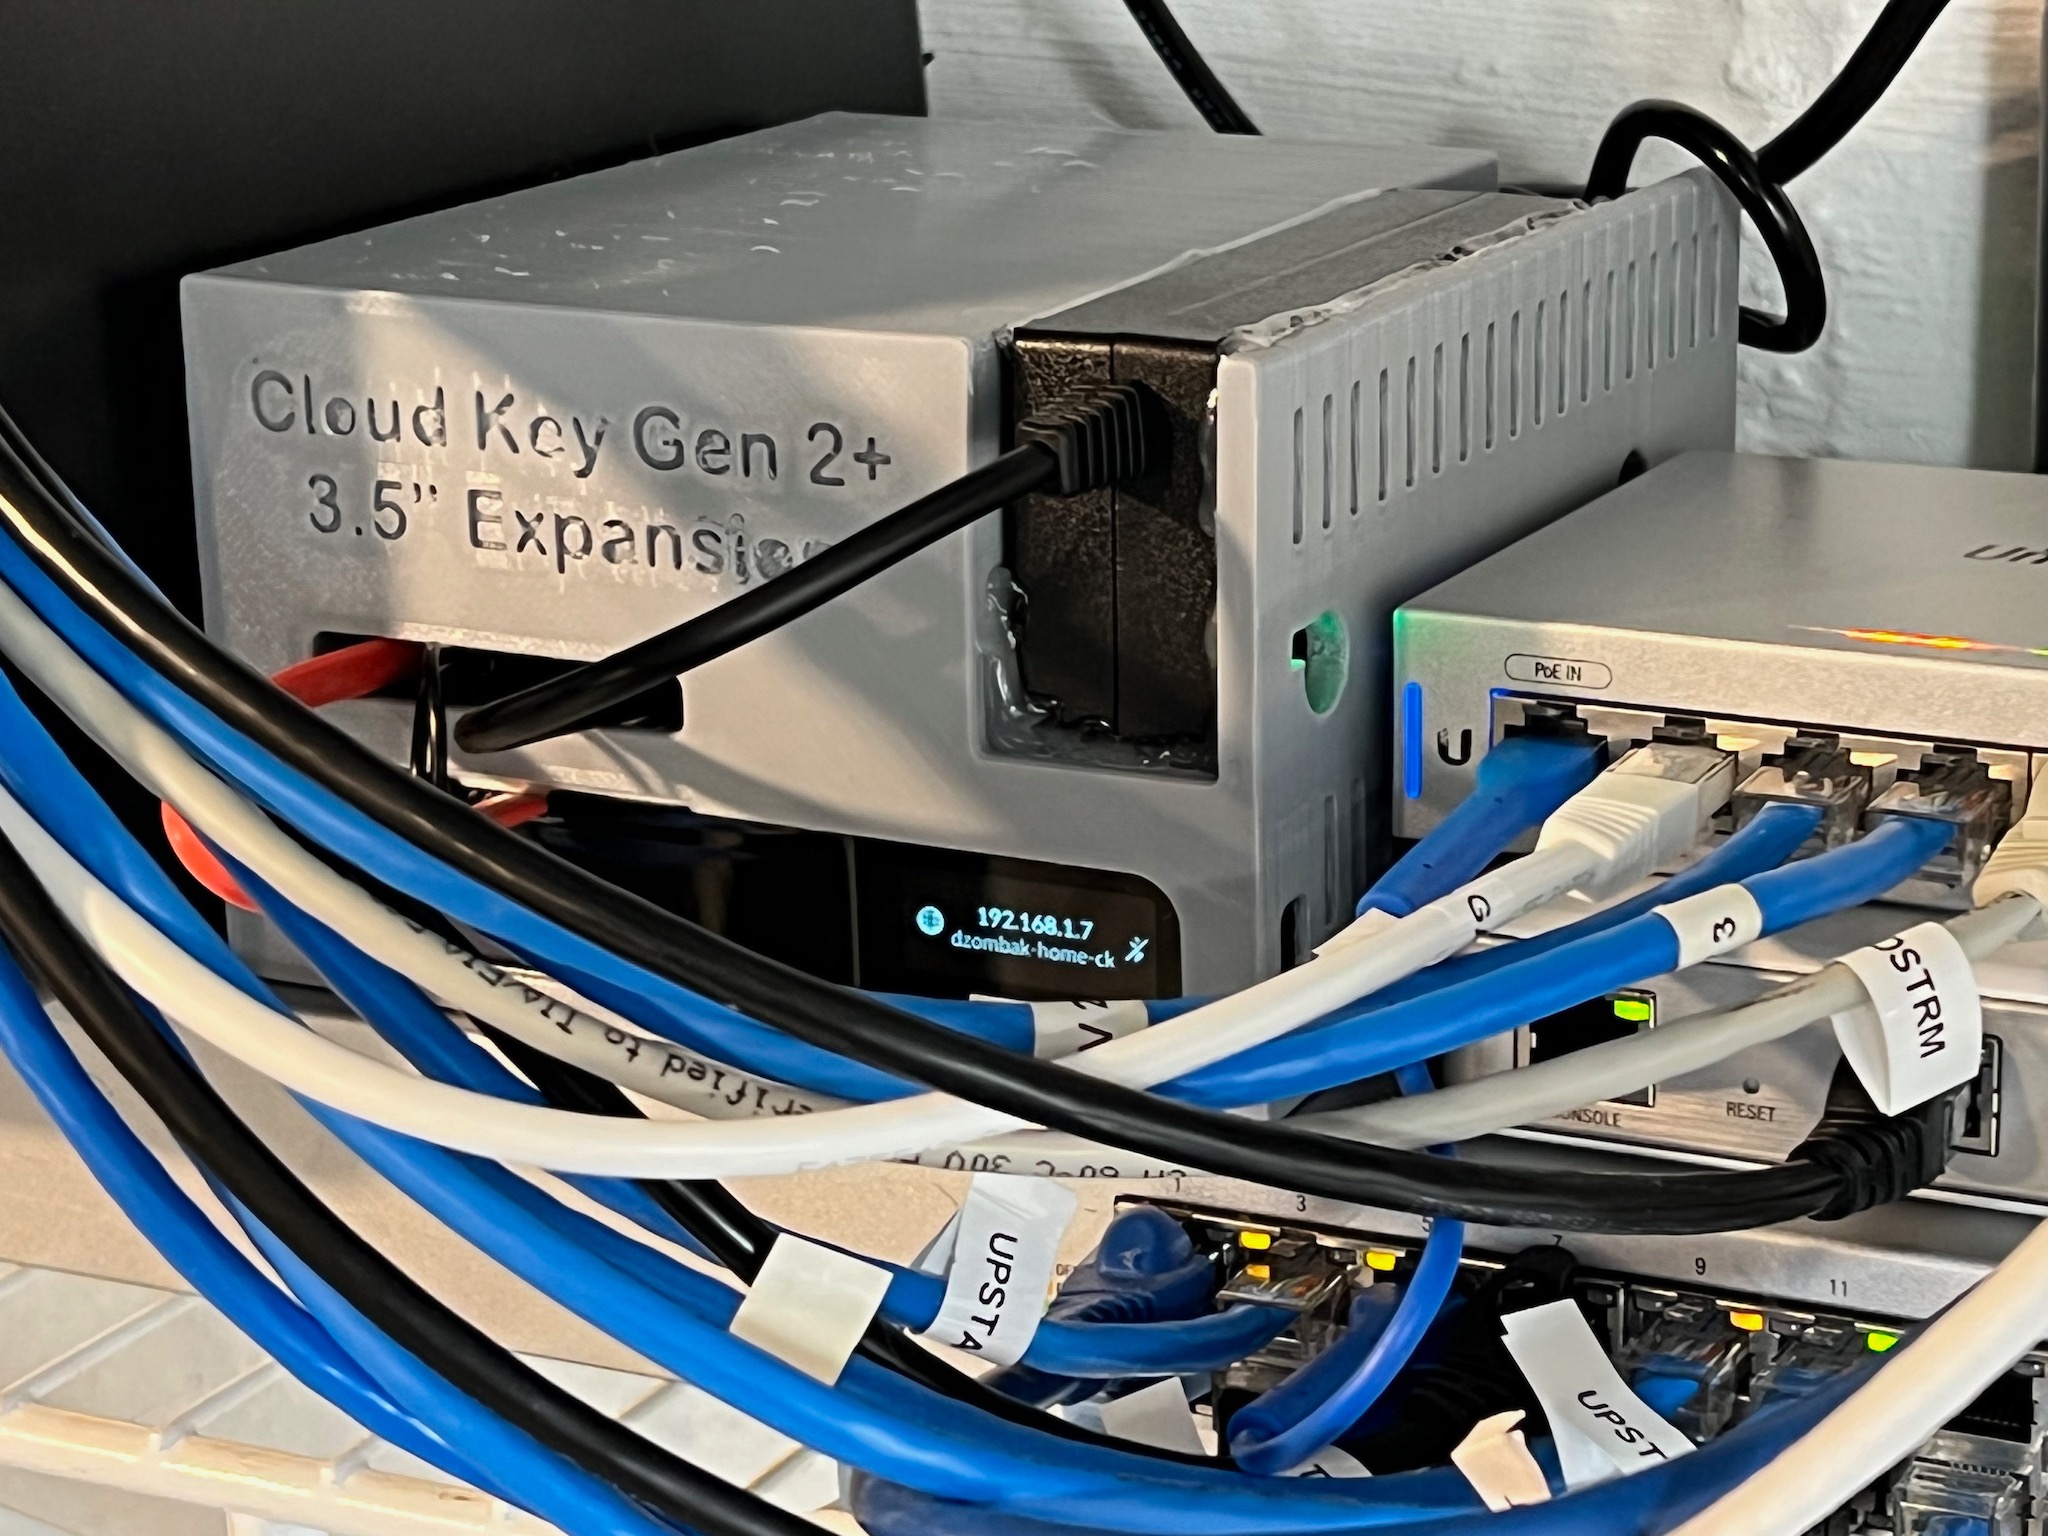 Cloud Key Expansion project in its enclosure alongside other networking gear